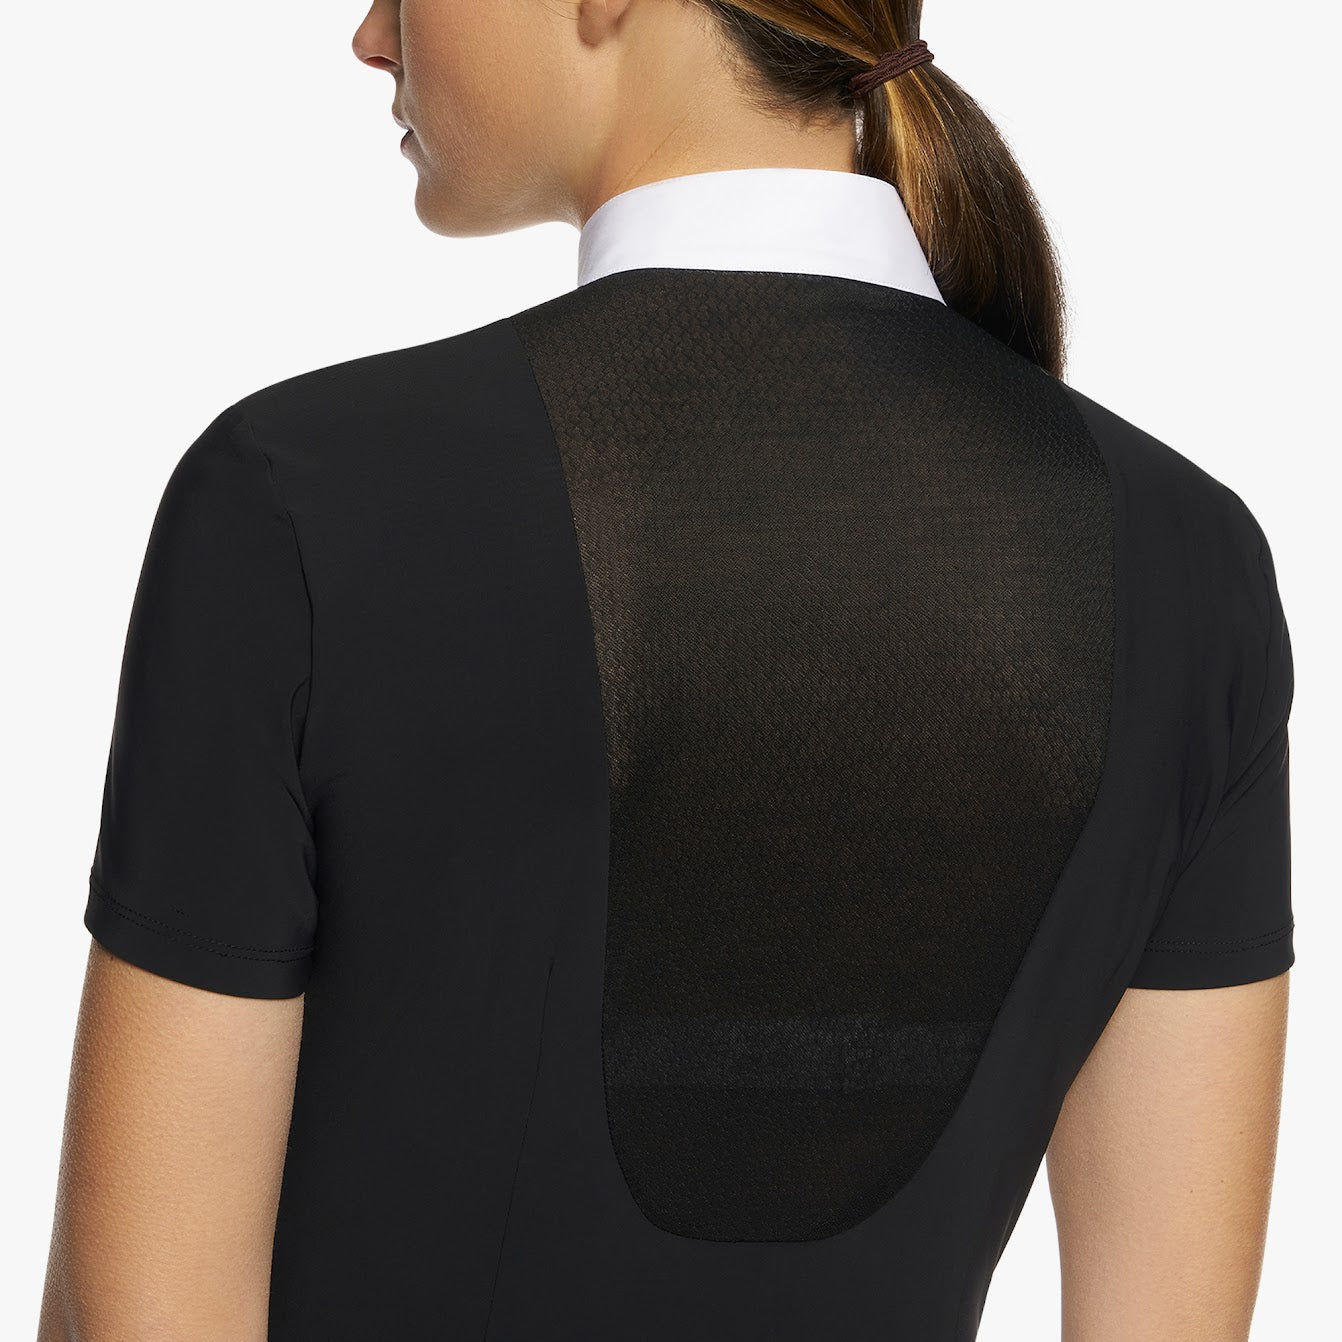 We love this Cavalleria Toscana black Lacy Drop S/S Show Shirt. The subtle semi sheer bib front and back is stunning. front placket button opening with the iconic CT logo embroidered on the collar. A must have for this season.